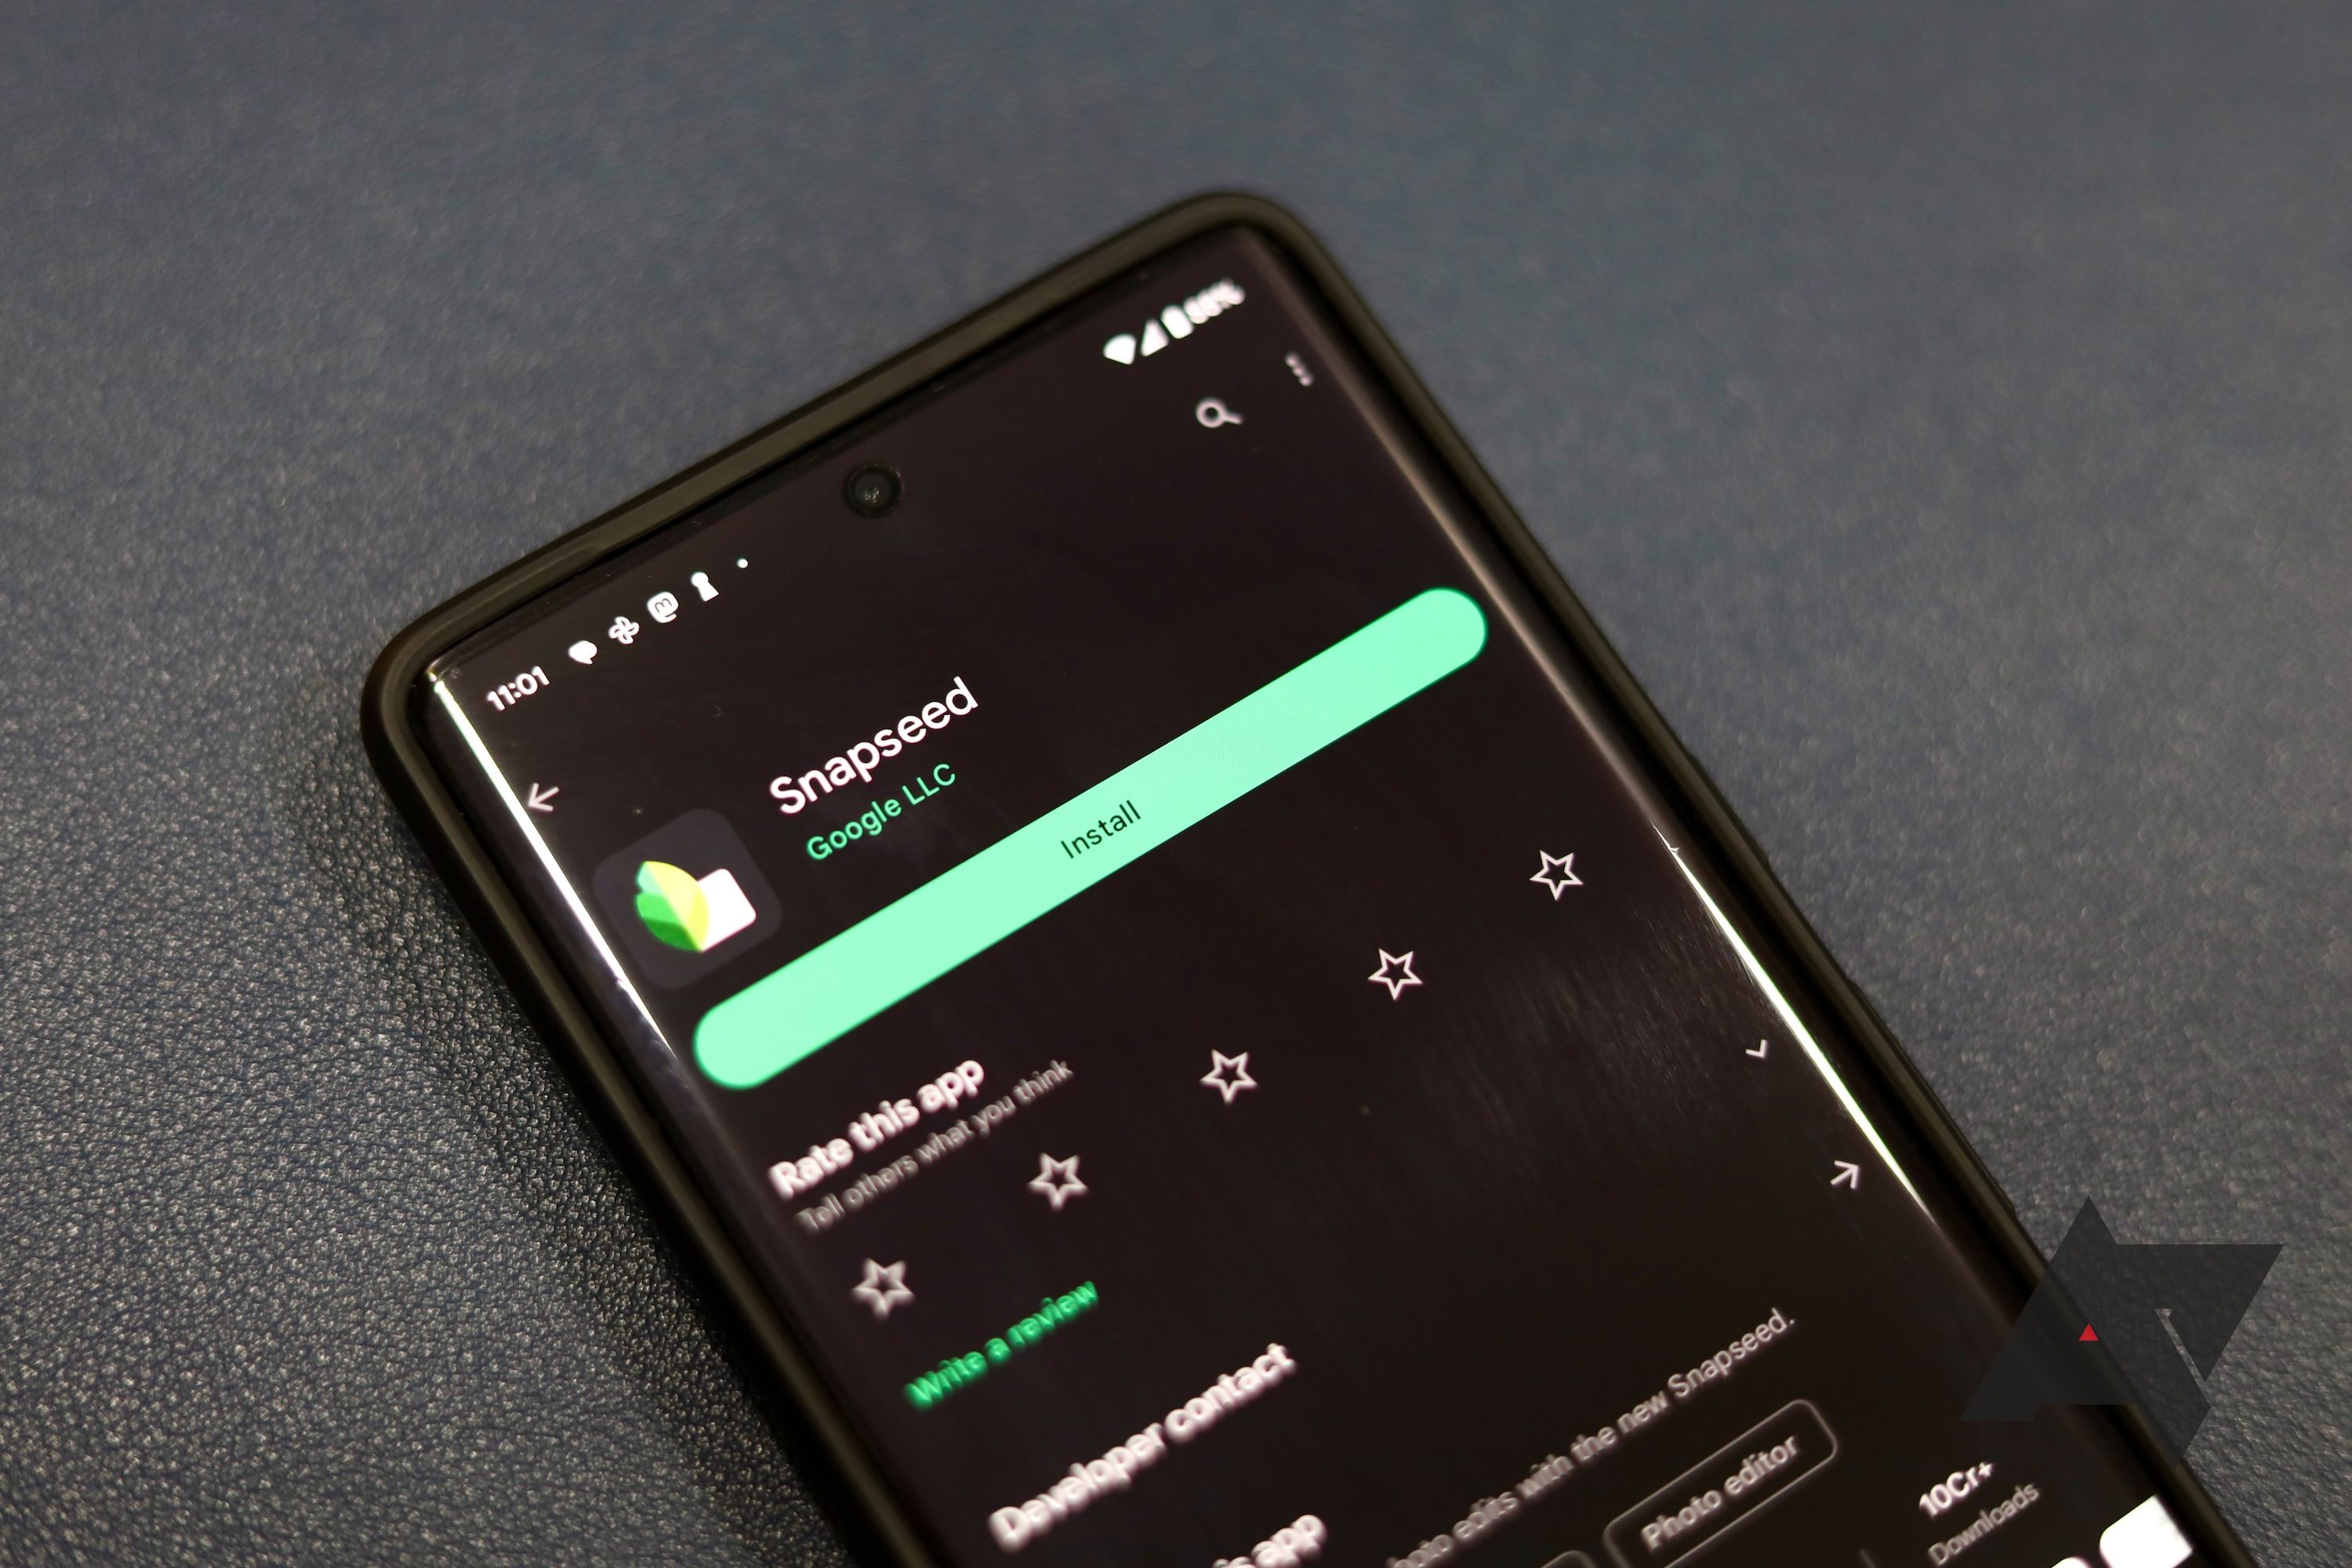 Snapseed gets an update after years, but it's not what you're hoping for